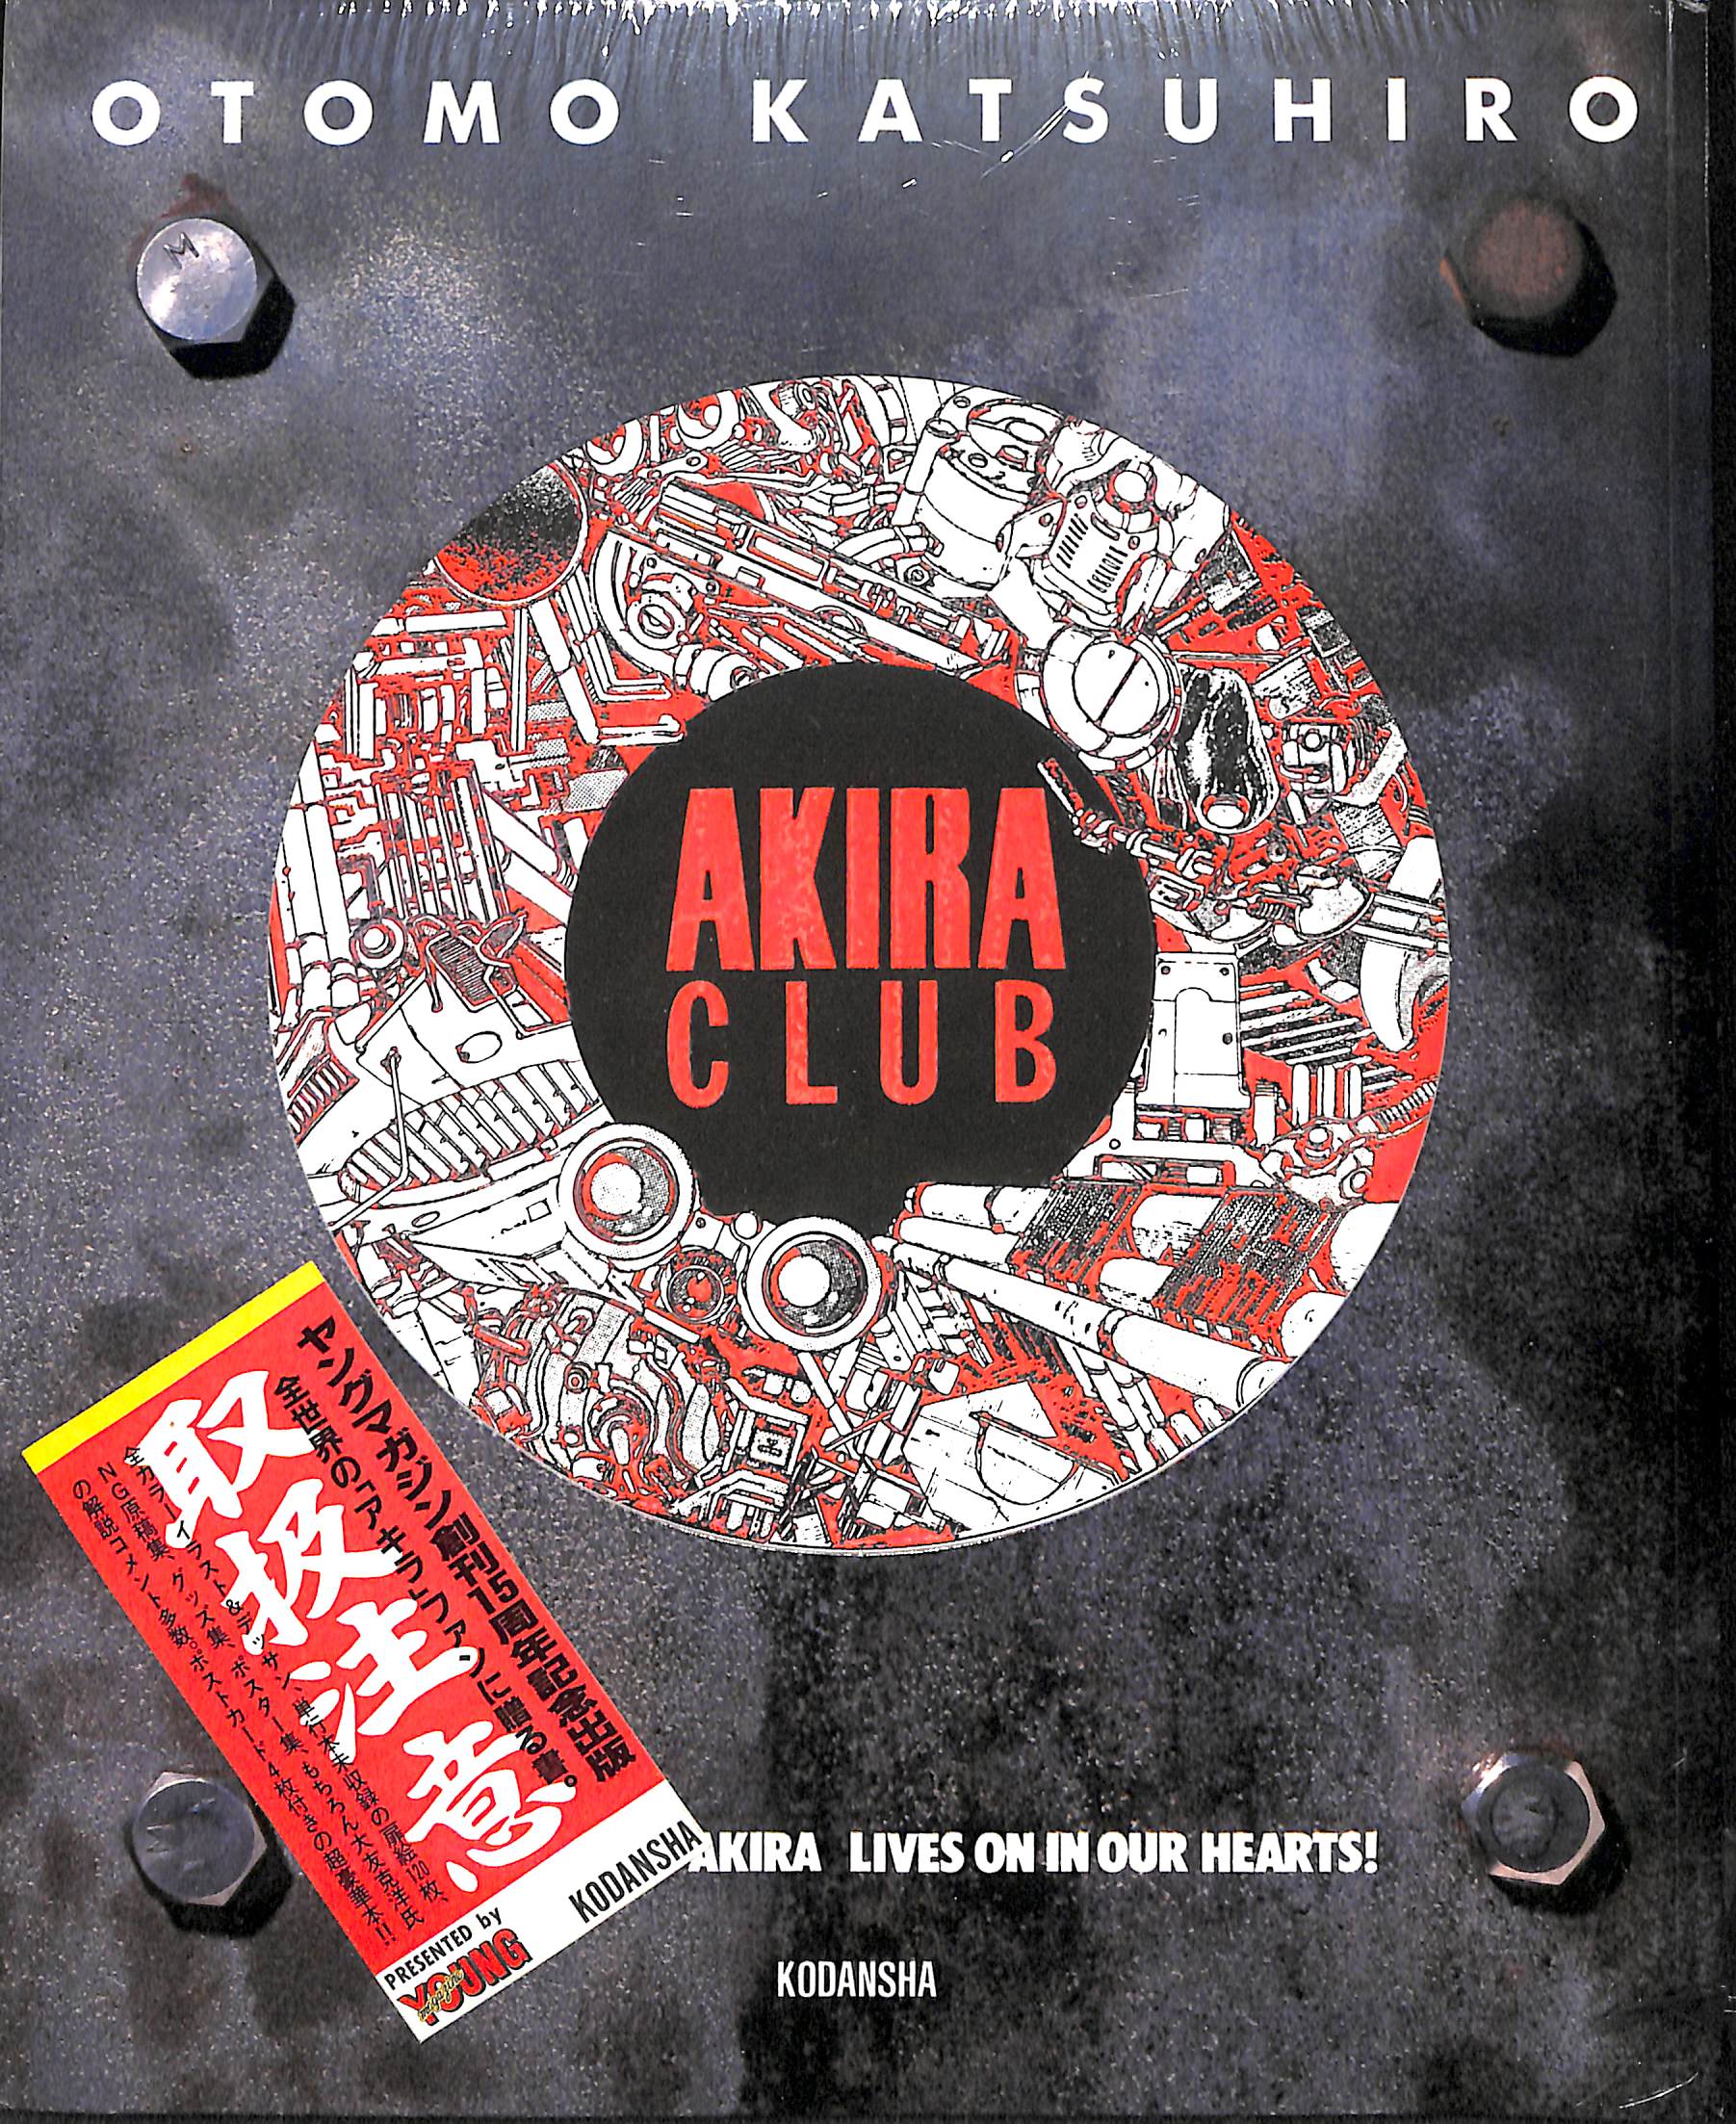 Akira Club The Memory Of Akira Lives On In Our Hearts 大友 克洋 Books Channel Store